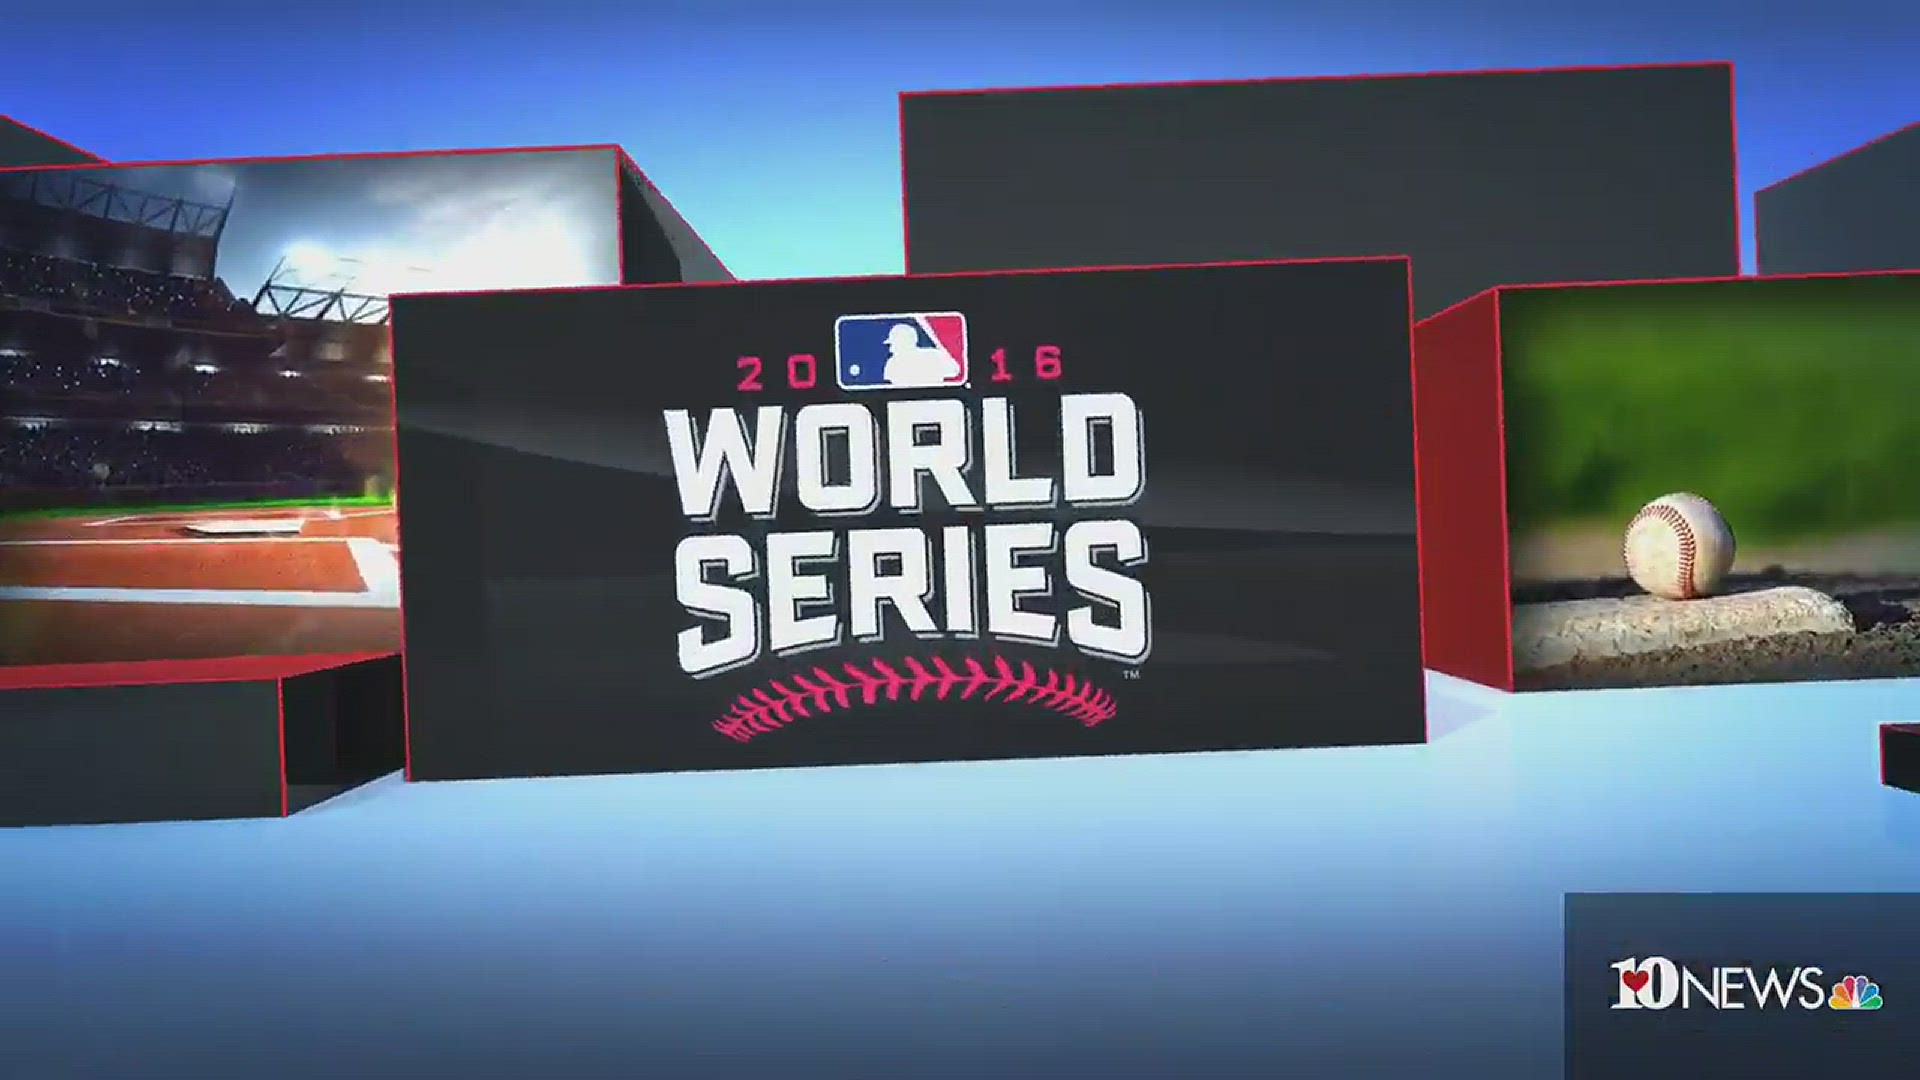 The Chicago Cubs host the Cleveland Indians at Wrigley Field in Game 4 of the 2016 World Series on Saturday night. Cleveland leads the series 2-1.